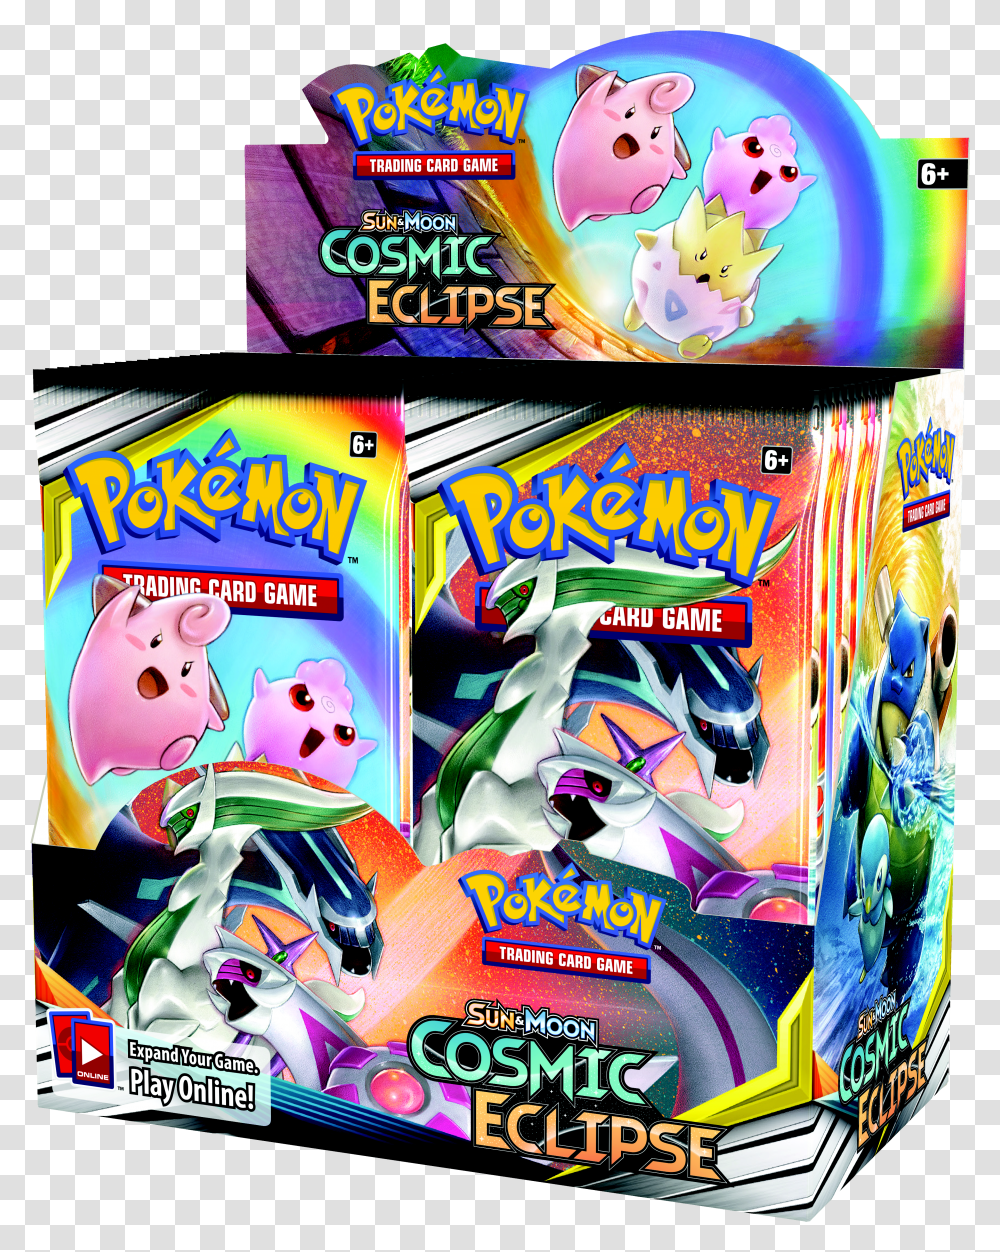 Sun And Moon Cosmic Eclipse Booster Box Pokemon Text Transparent Png